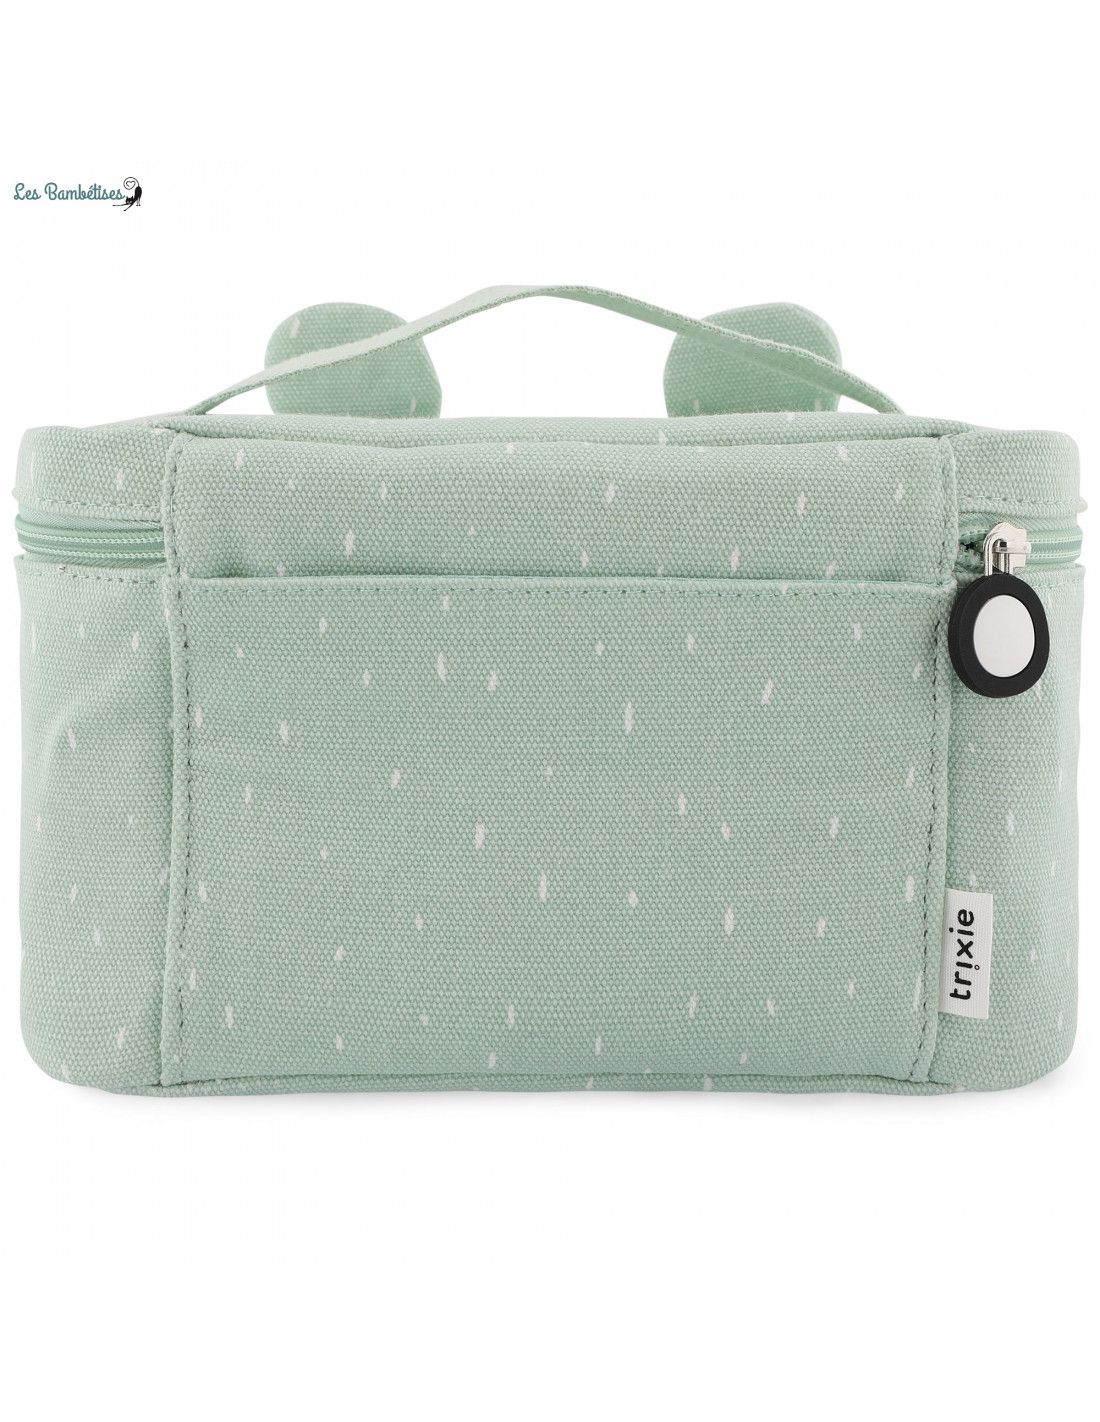 Sac Isotherme Ours Polaire Trixie - Les Bambetises